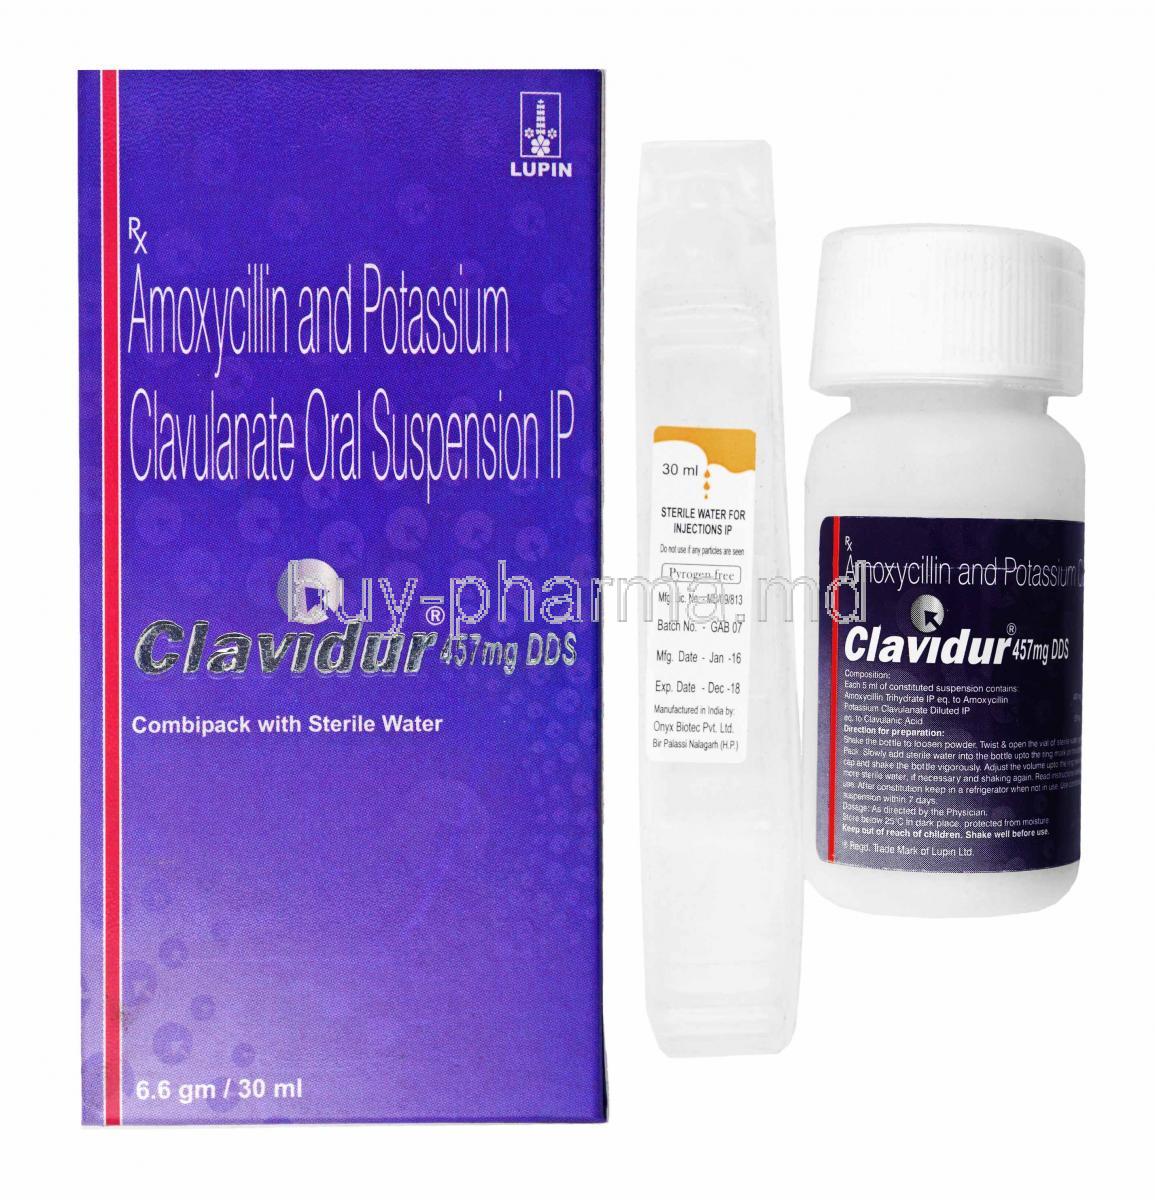 Clavidur DdS Oral Suspension, Amoxicillin and Clavulanic Acid box and bottle